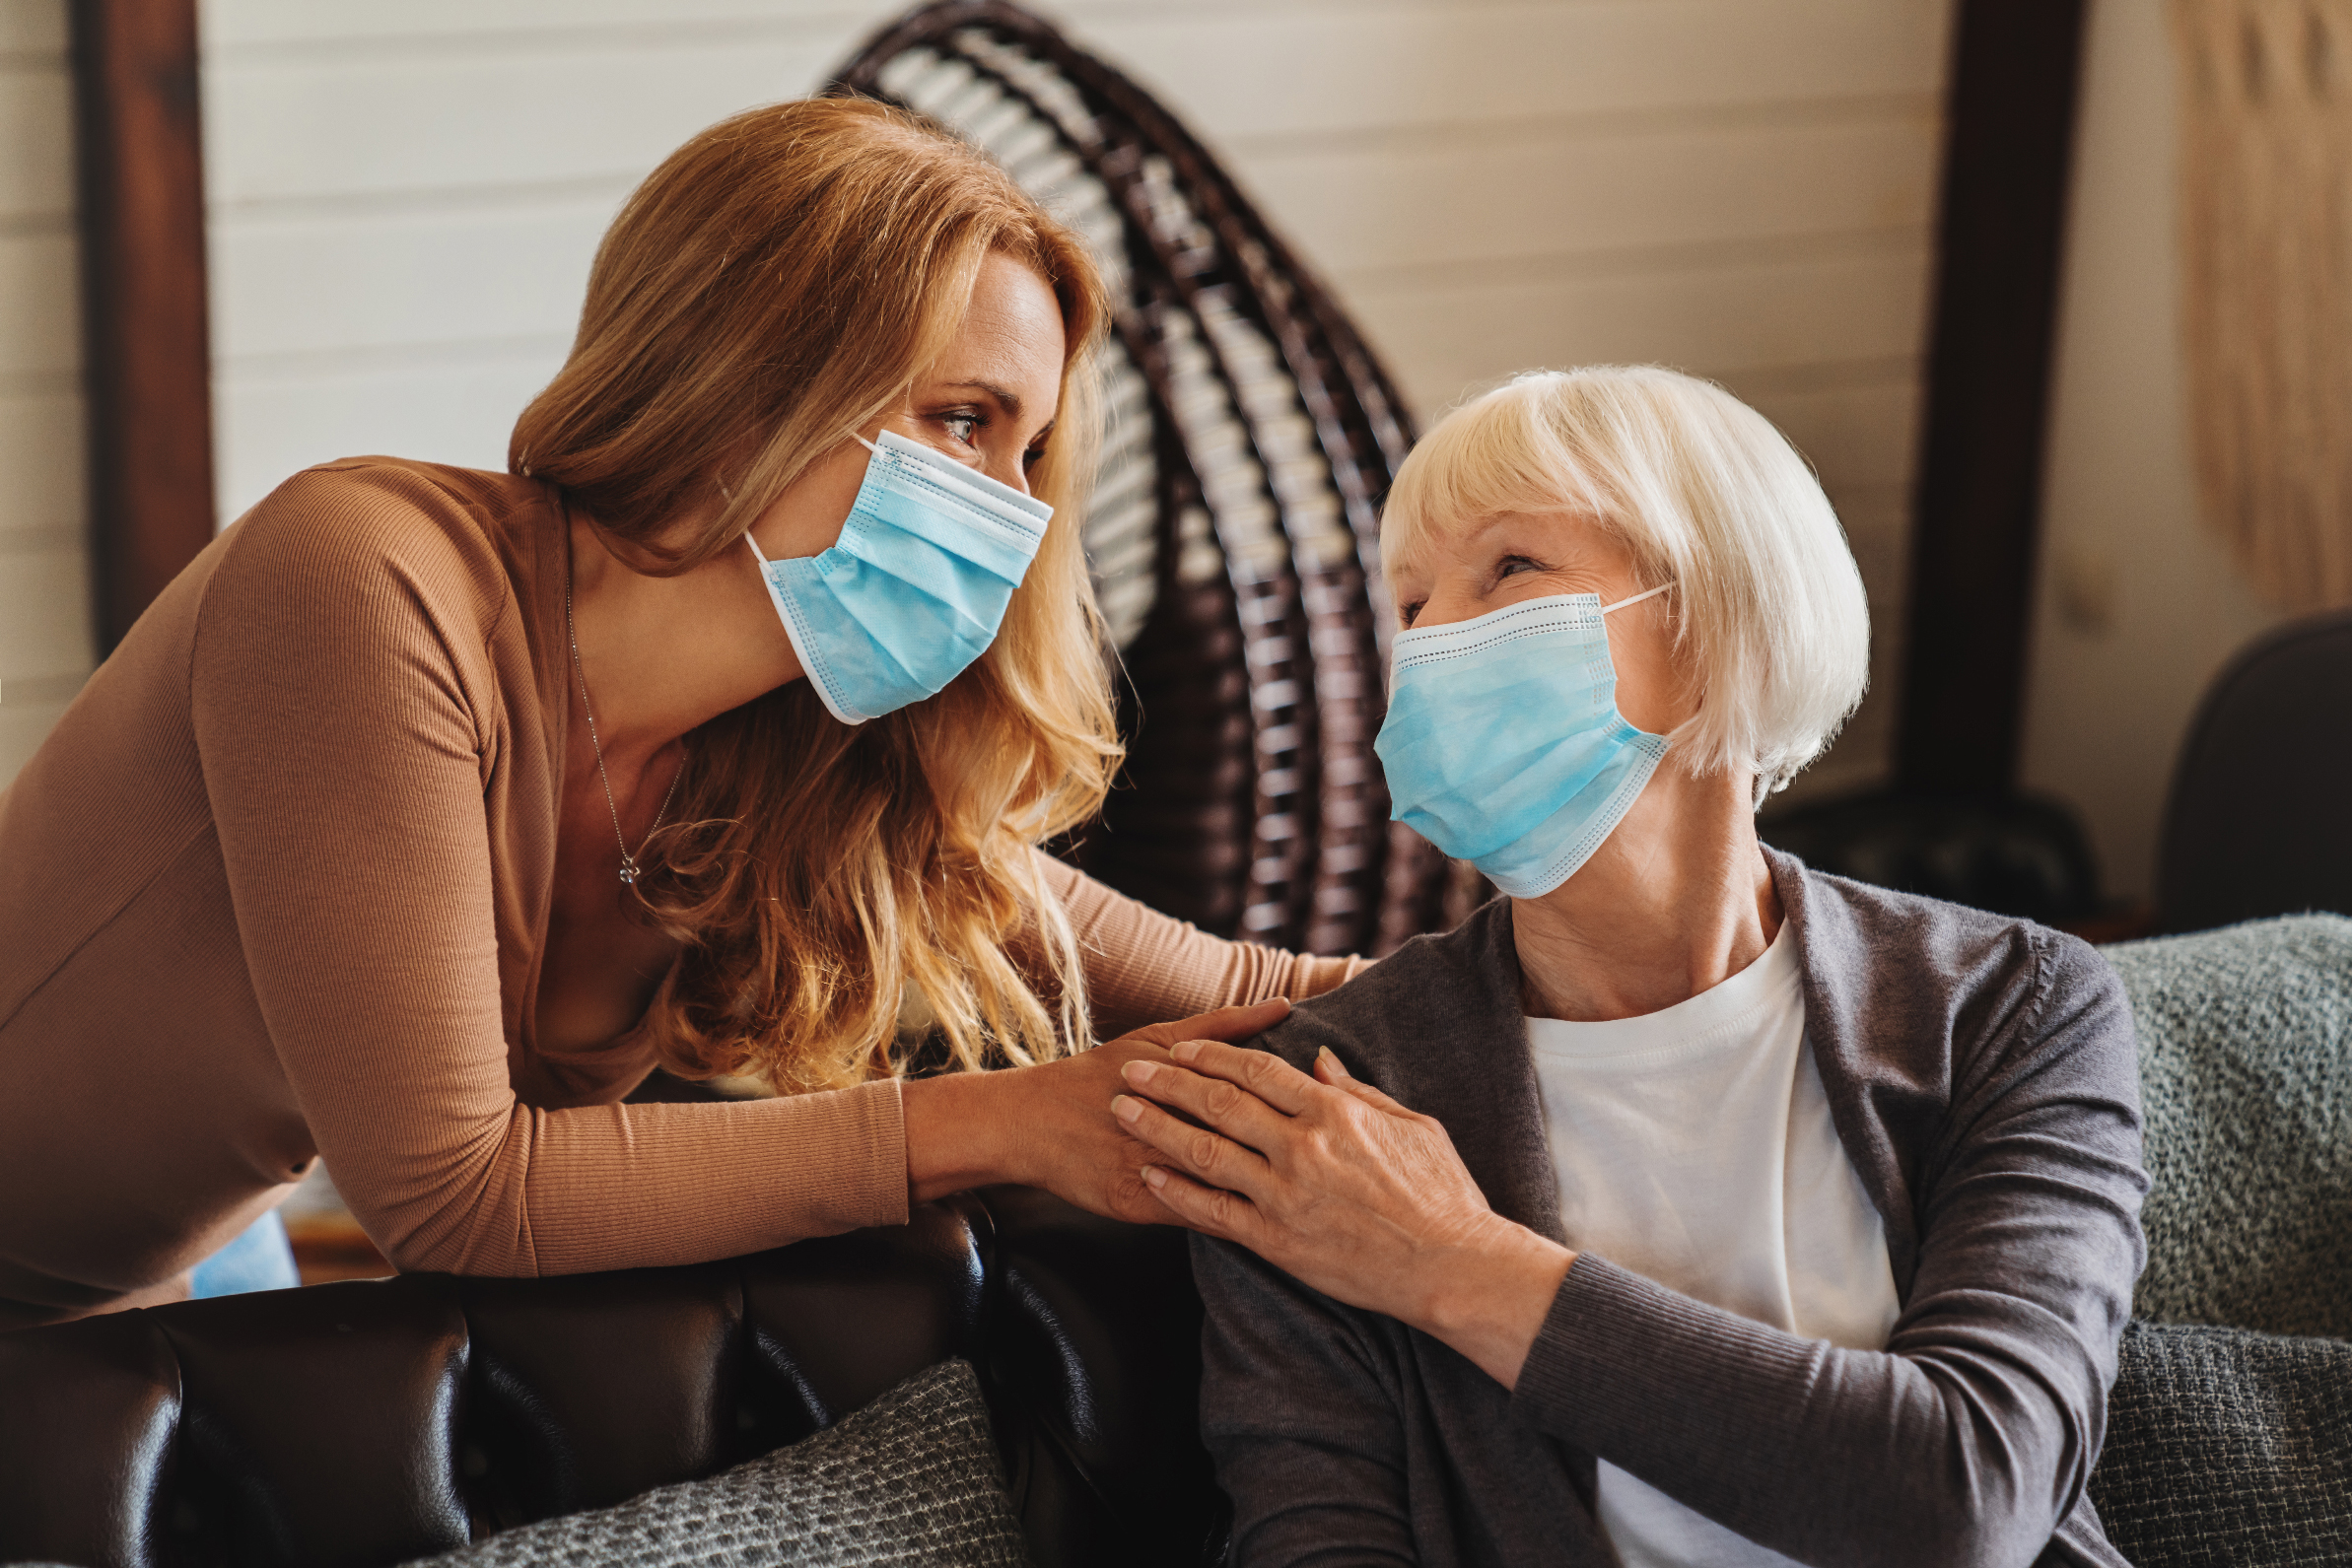 Stock photo of women wearing surgical masks